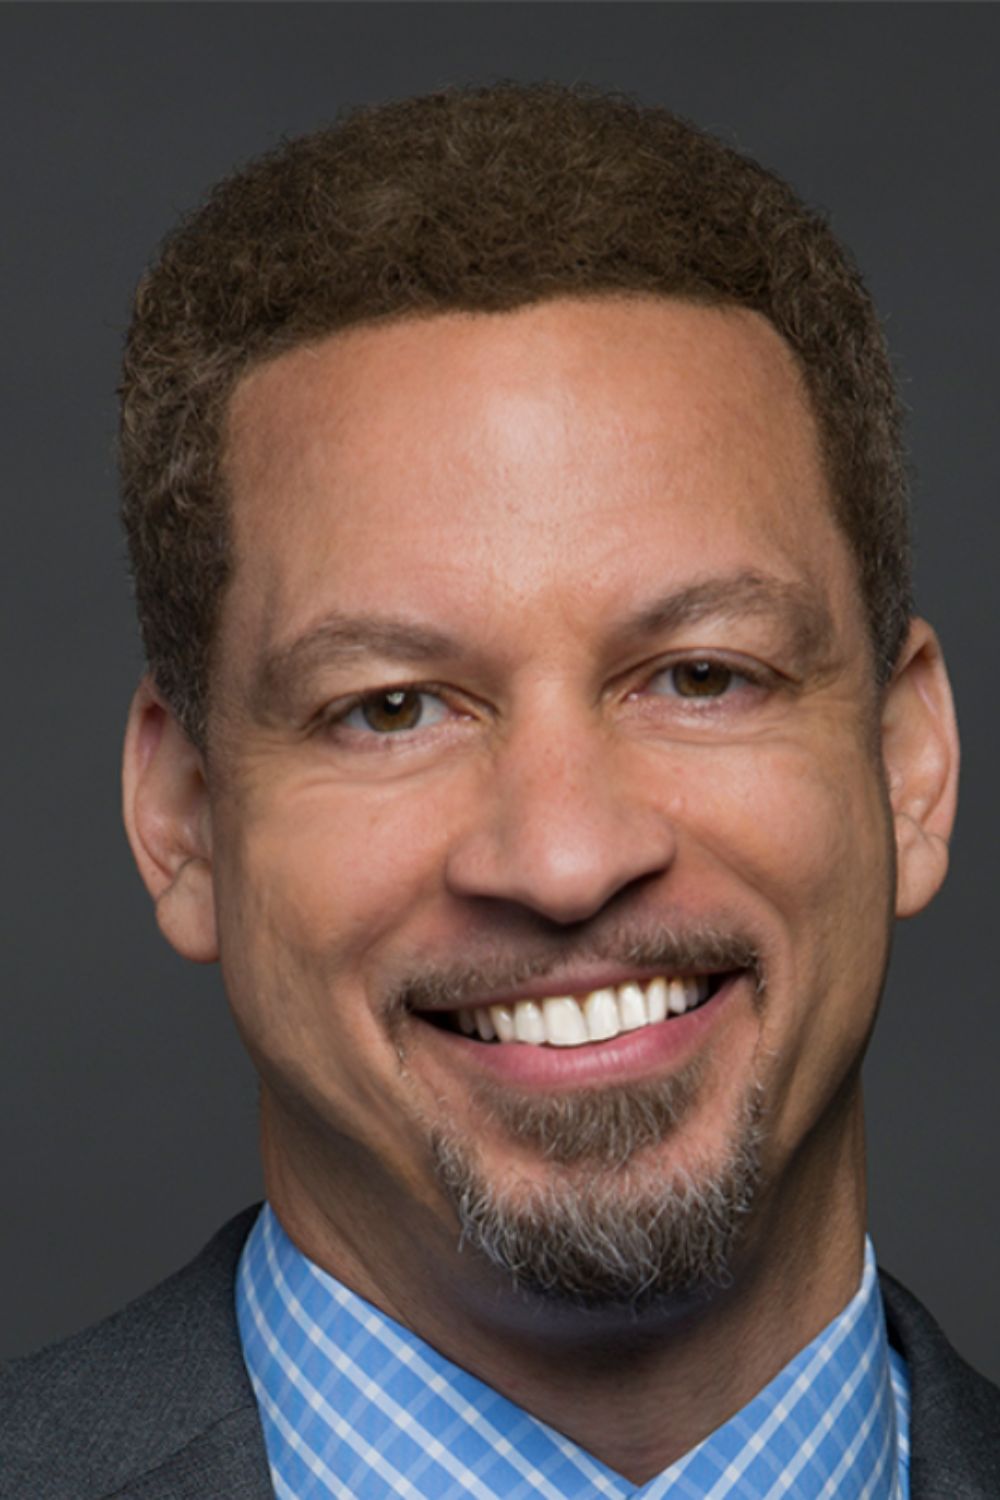 Chris Broussard Is Of African American Ethnicity